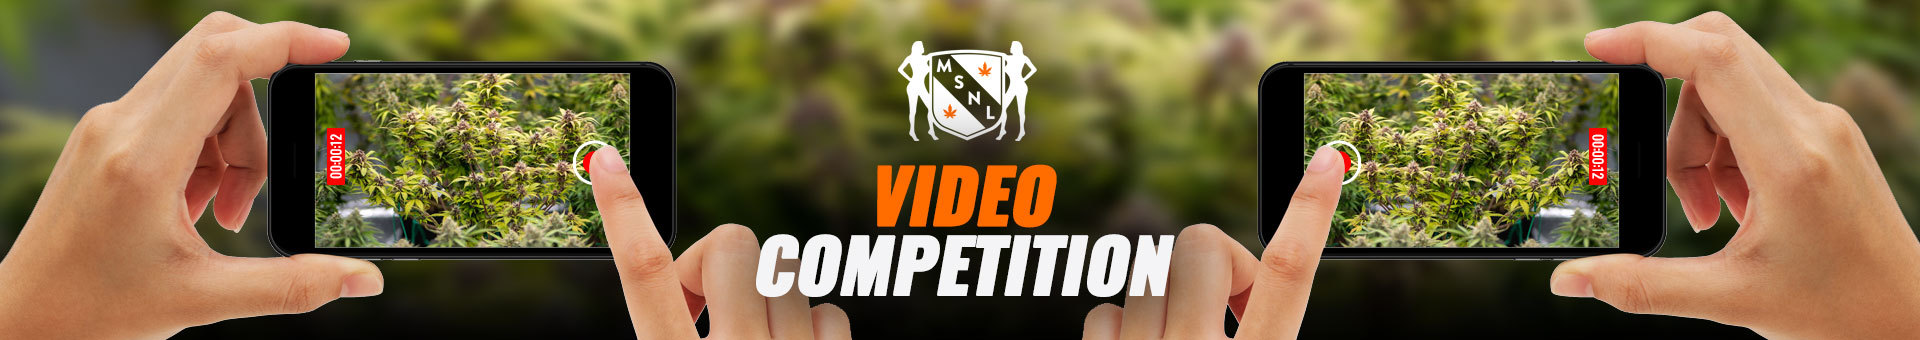 MSNL Video Competition